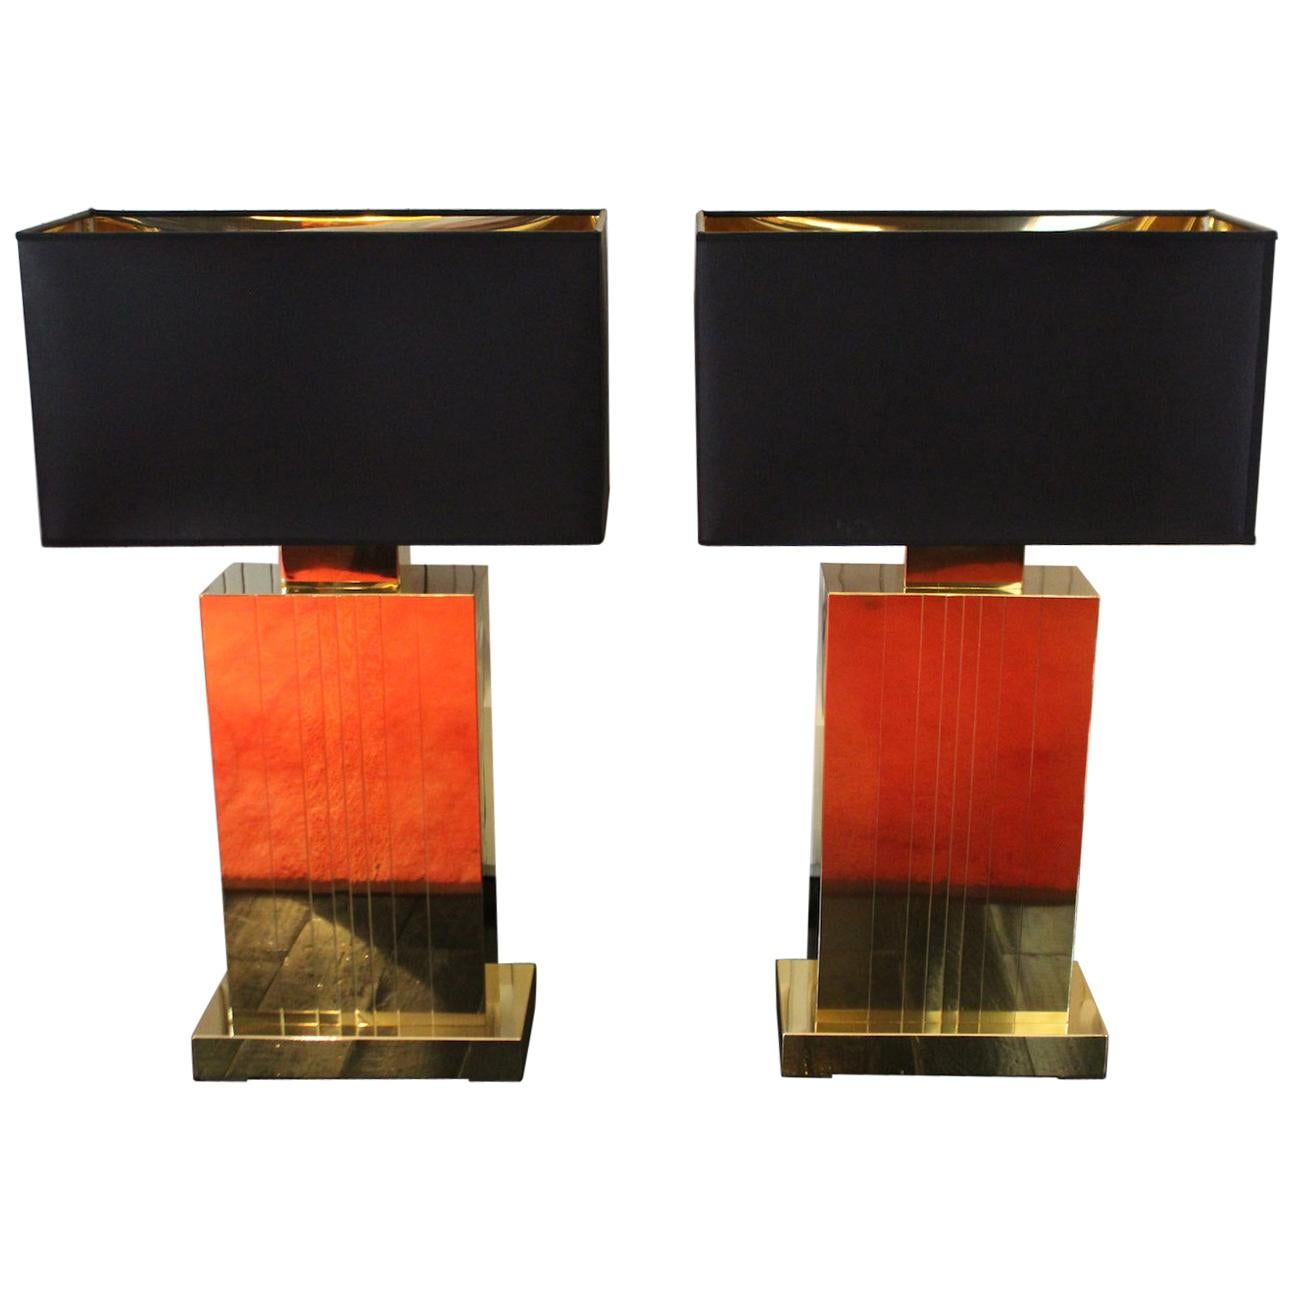 1970s Italian Deco Design Table Lamps Completely in Brass